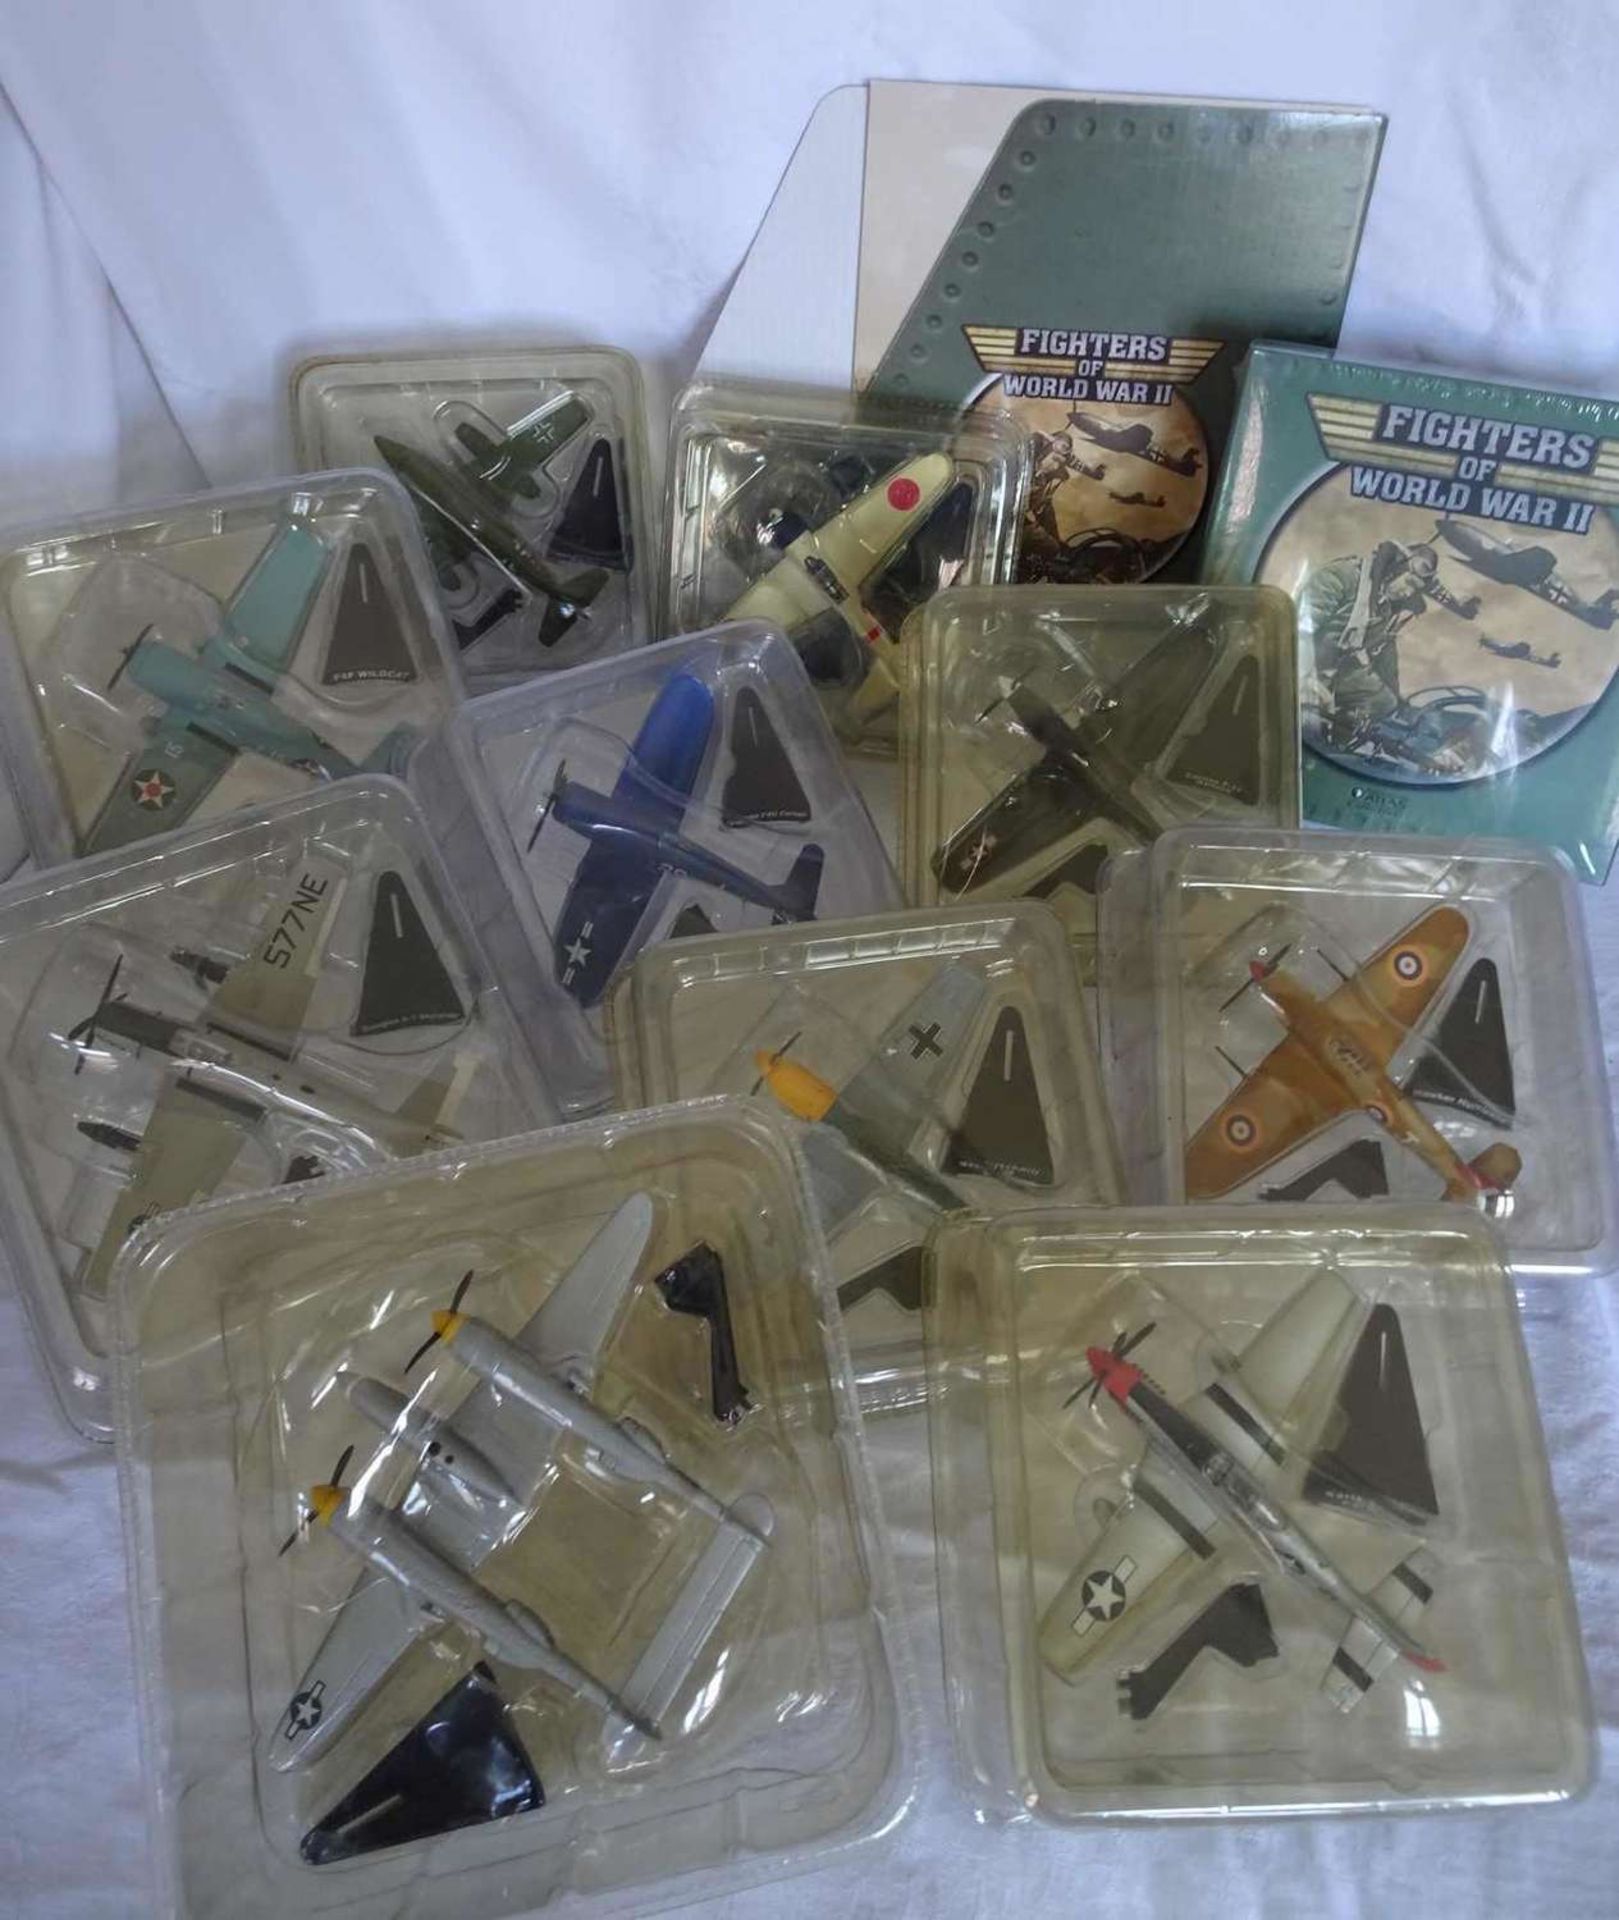 Atlas airplane models "Fighters of the World War II" in original packaging. A total of 17 pieces.